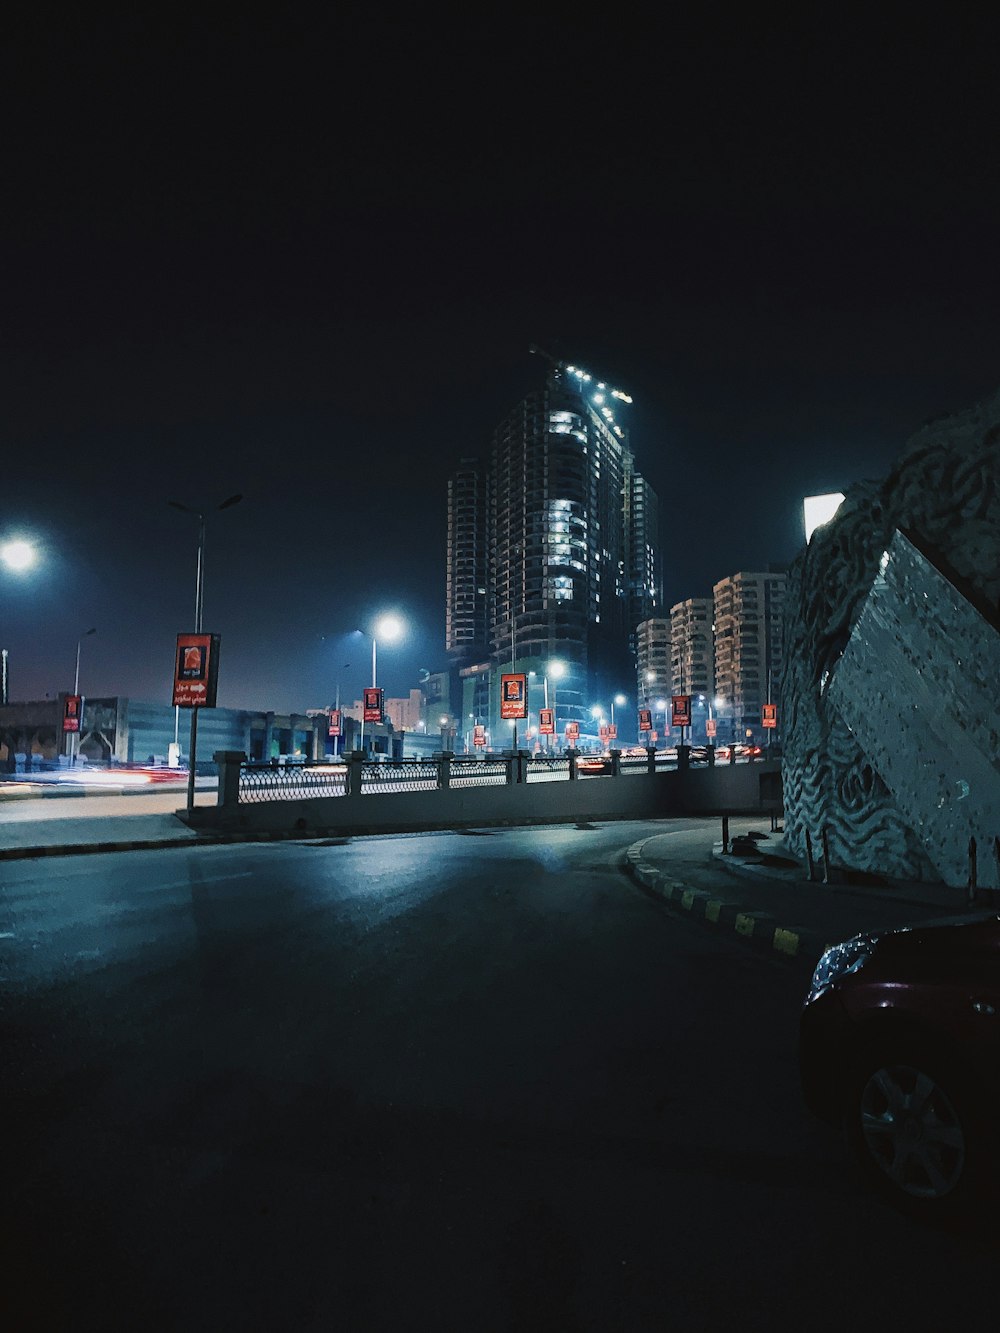 cars on road near city buildings during night time